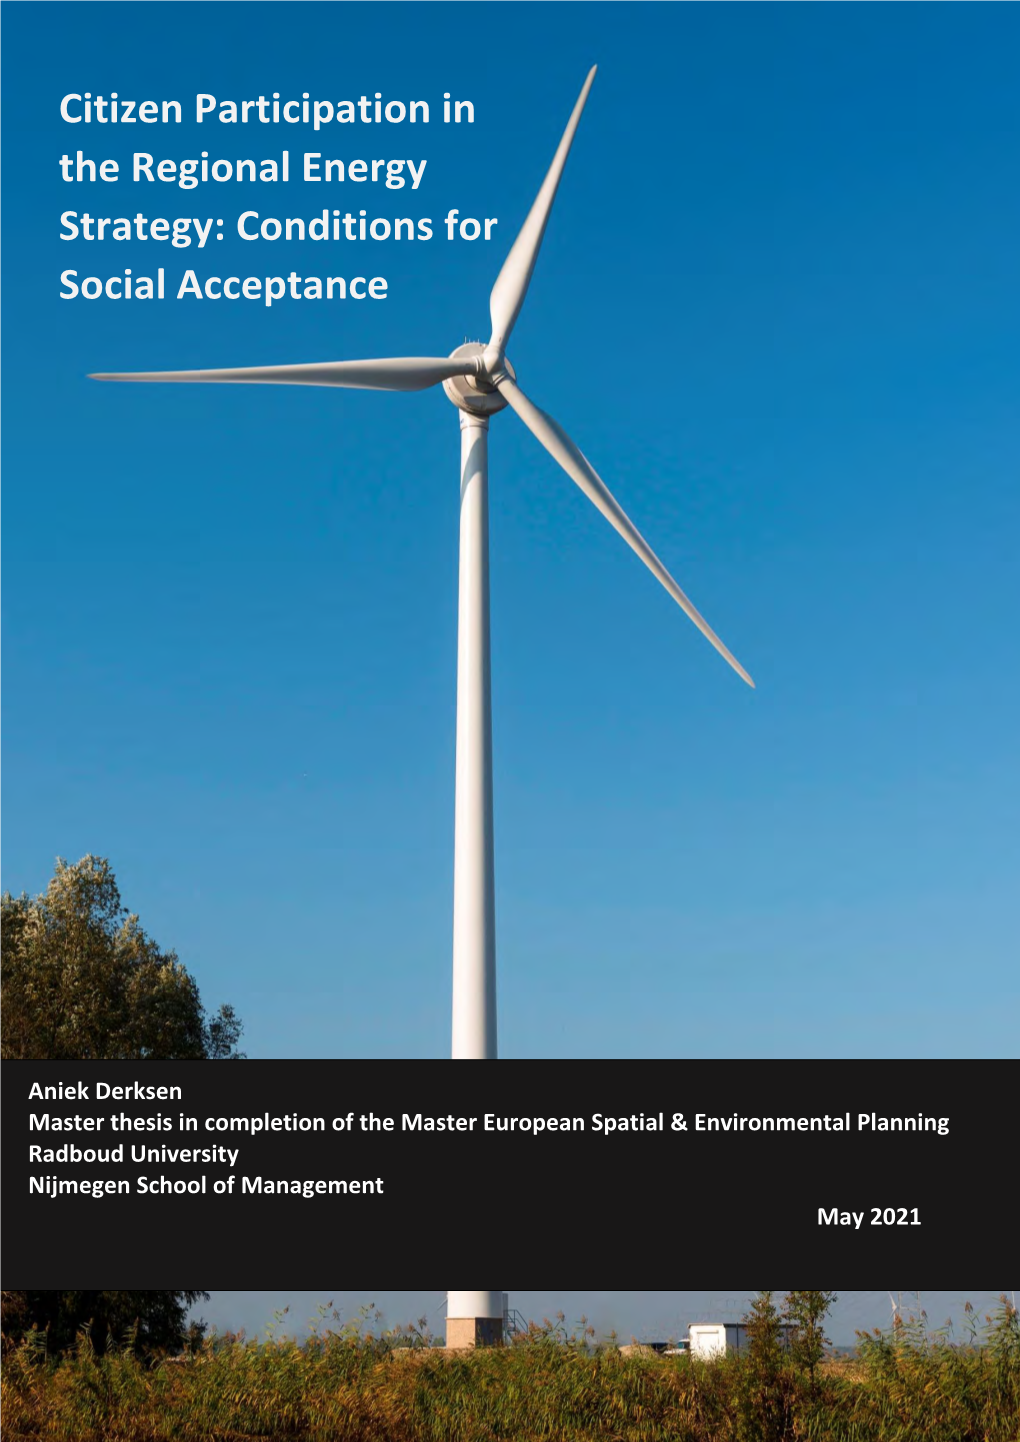 Citizen Participation in the Regional Energy Strategy: Conditions for Social Acceptance